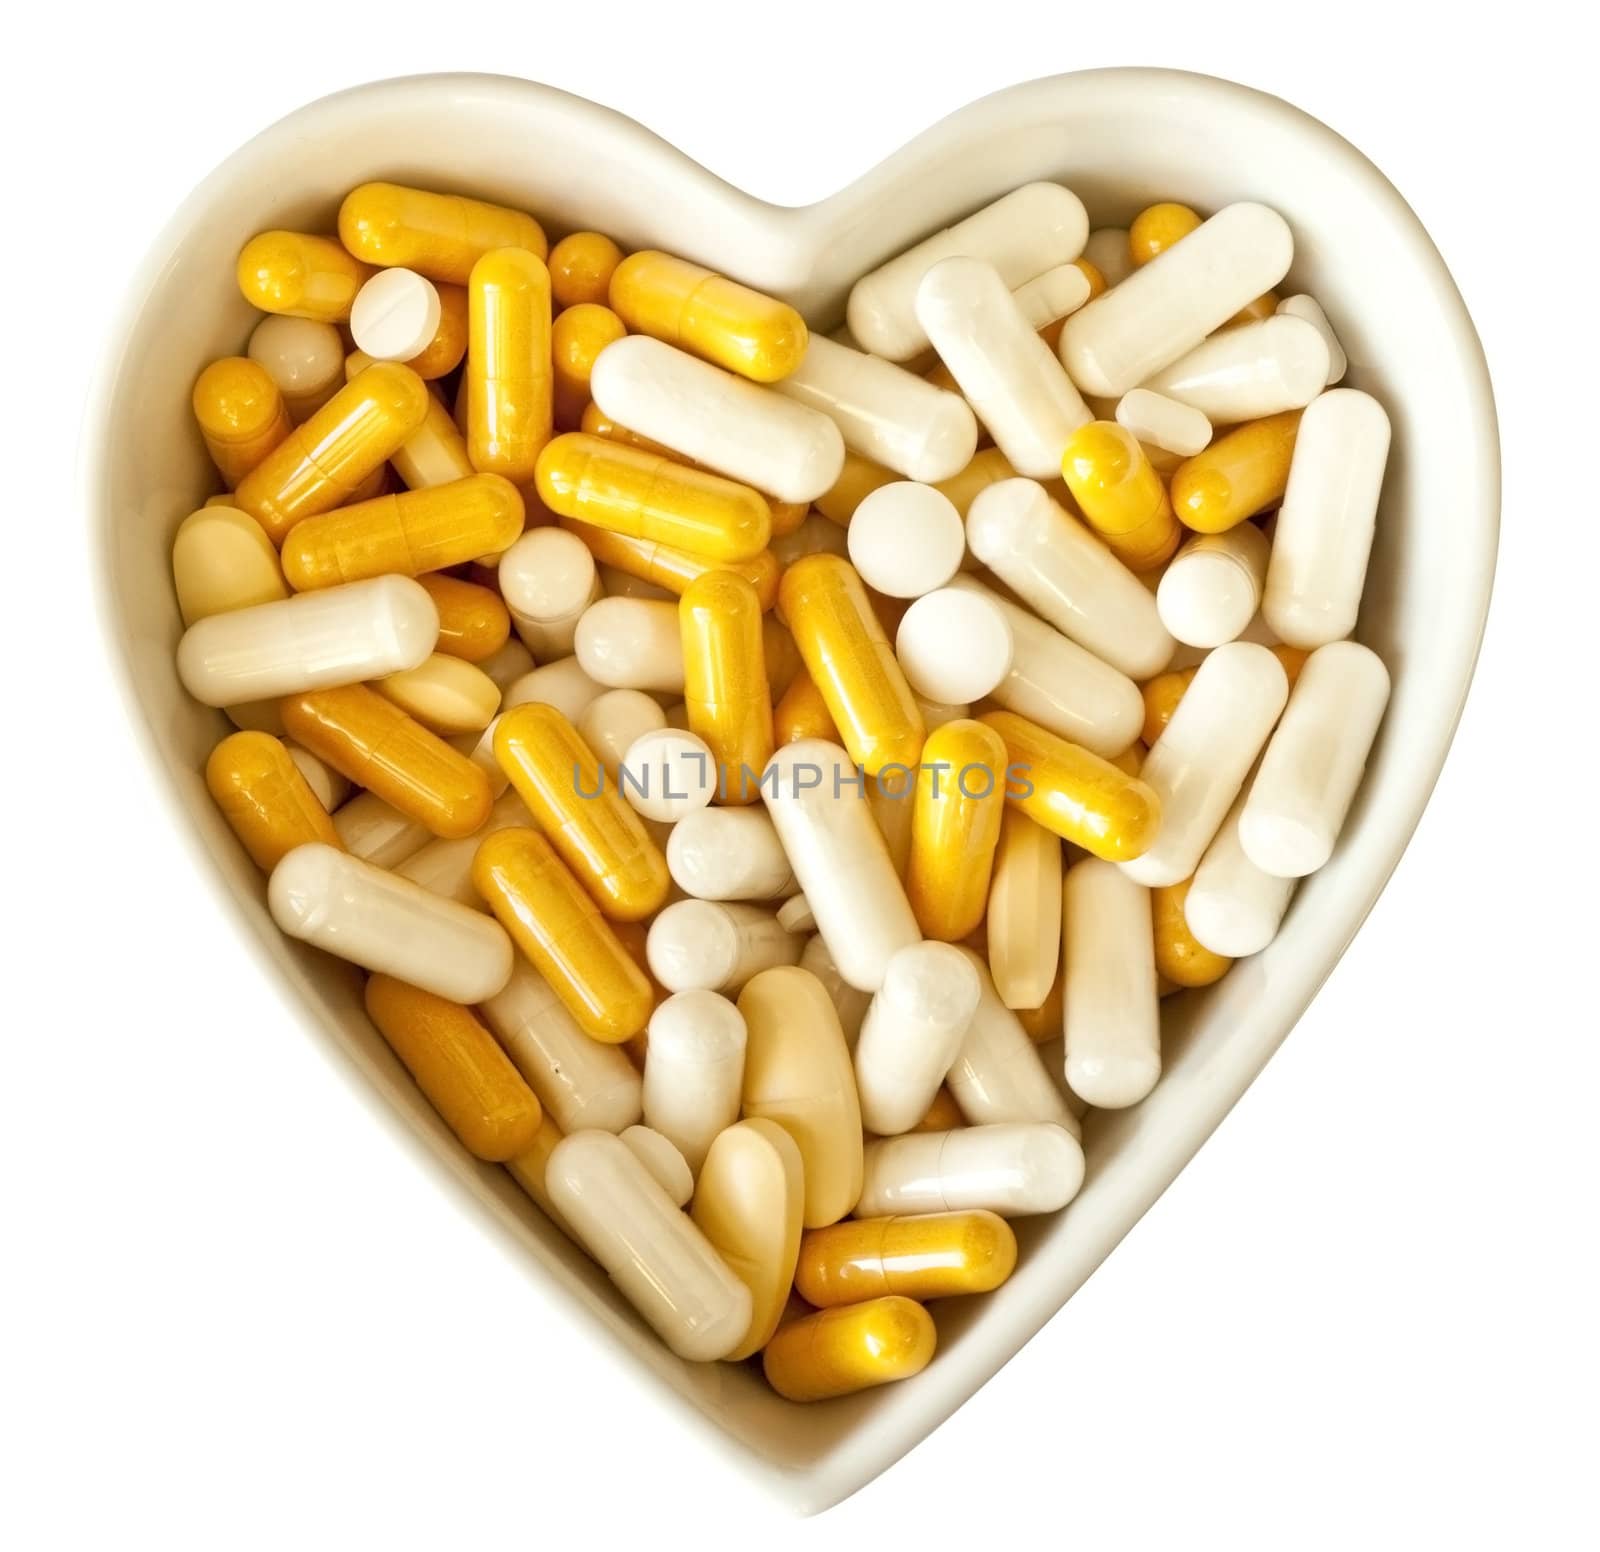 Heart shaped bowl filled with medicine or diet supplements, with clipping path